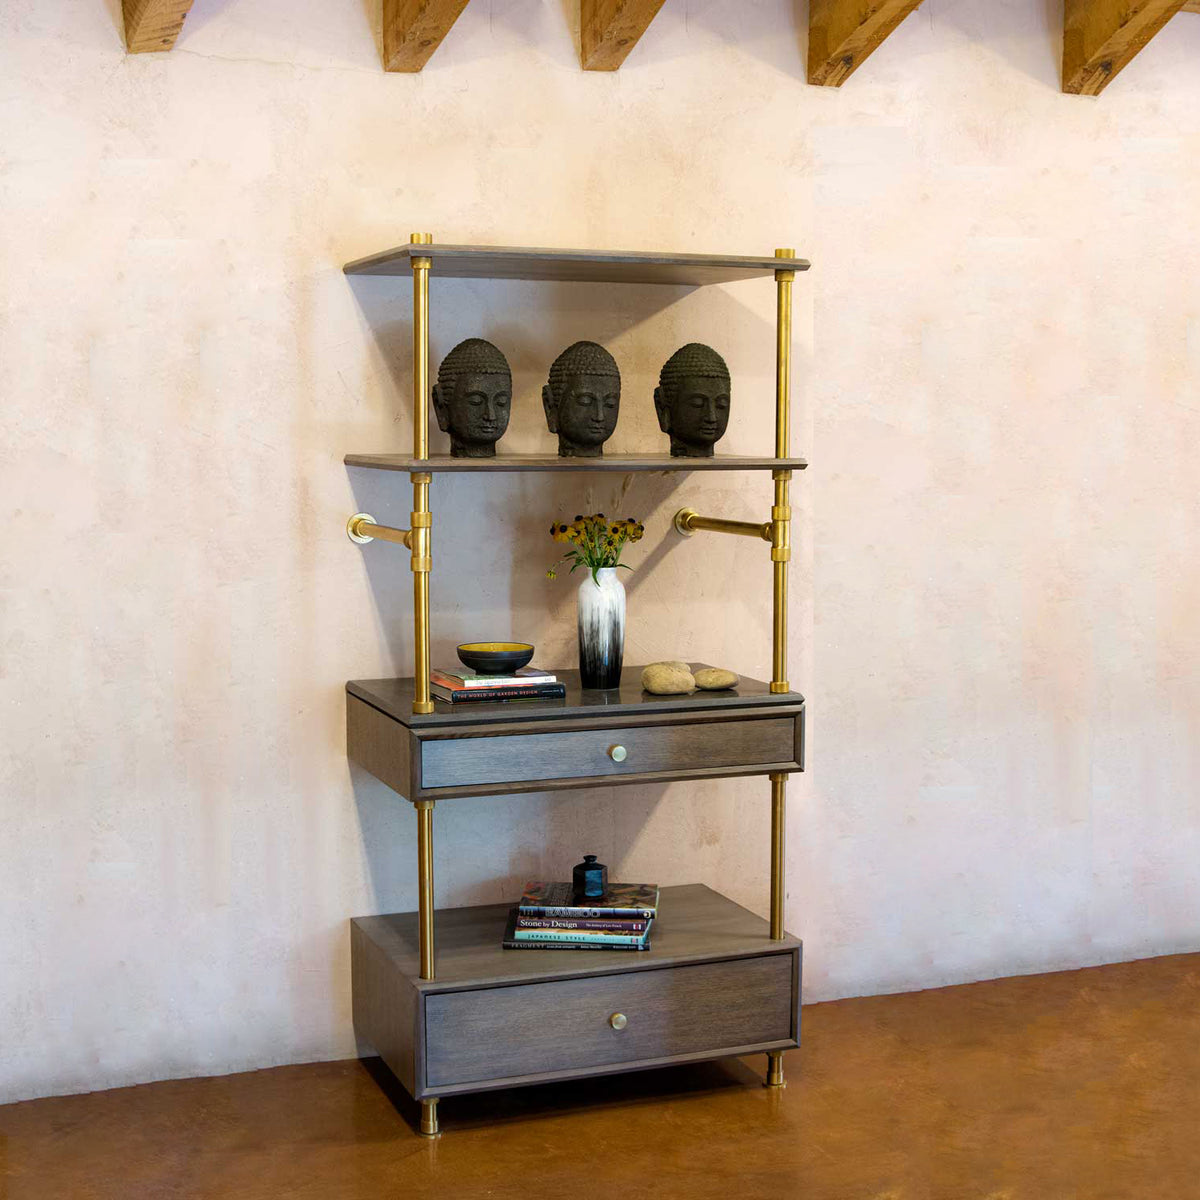 Stone Forest Elemental Classic Storage Set in aged brass and antique gray limestone. image 1 of 4